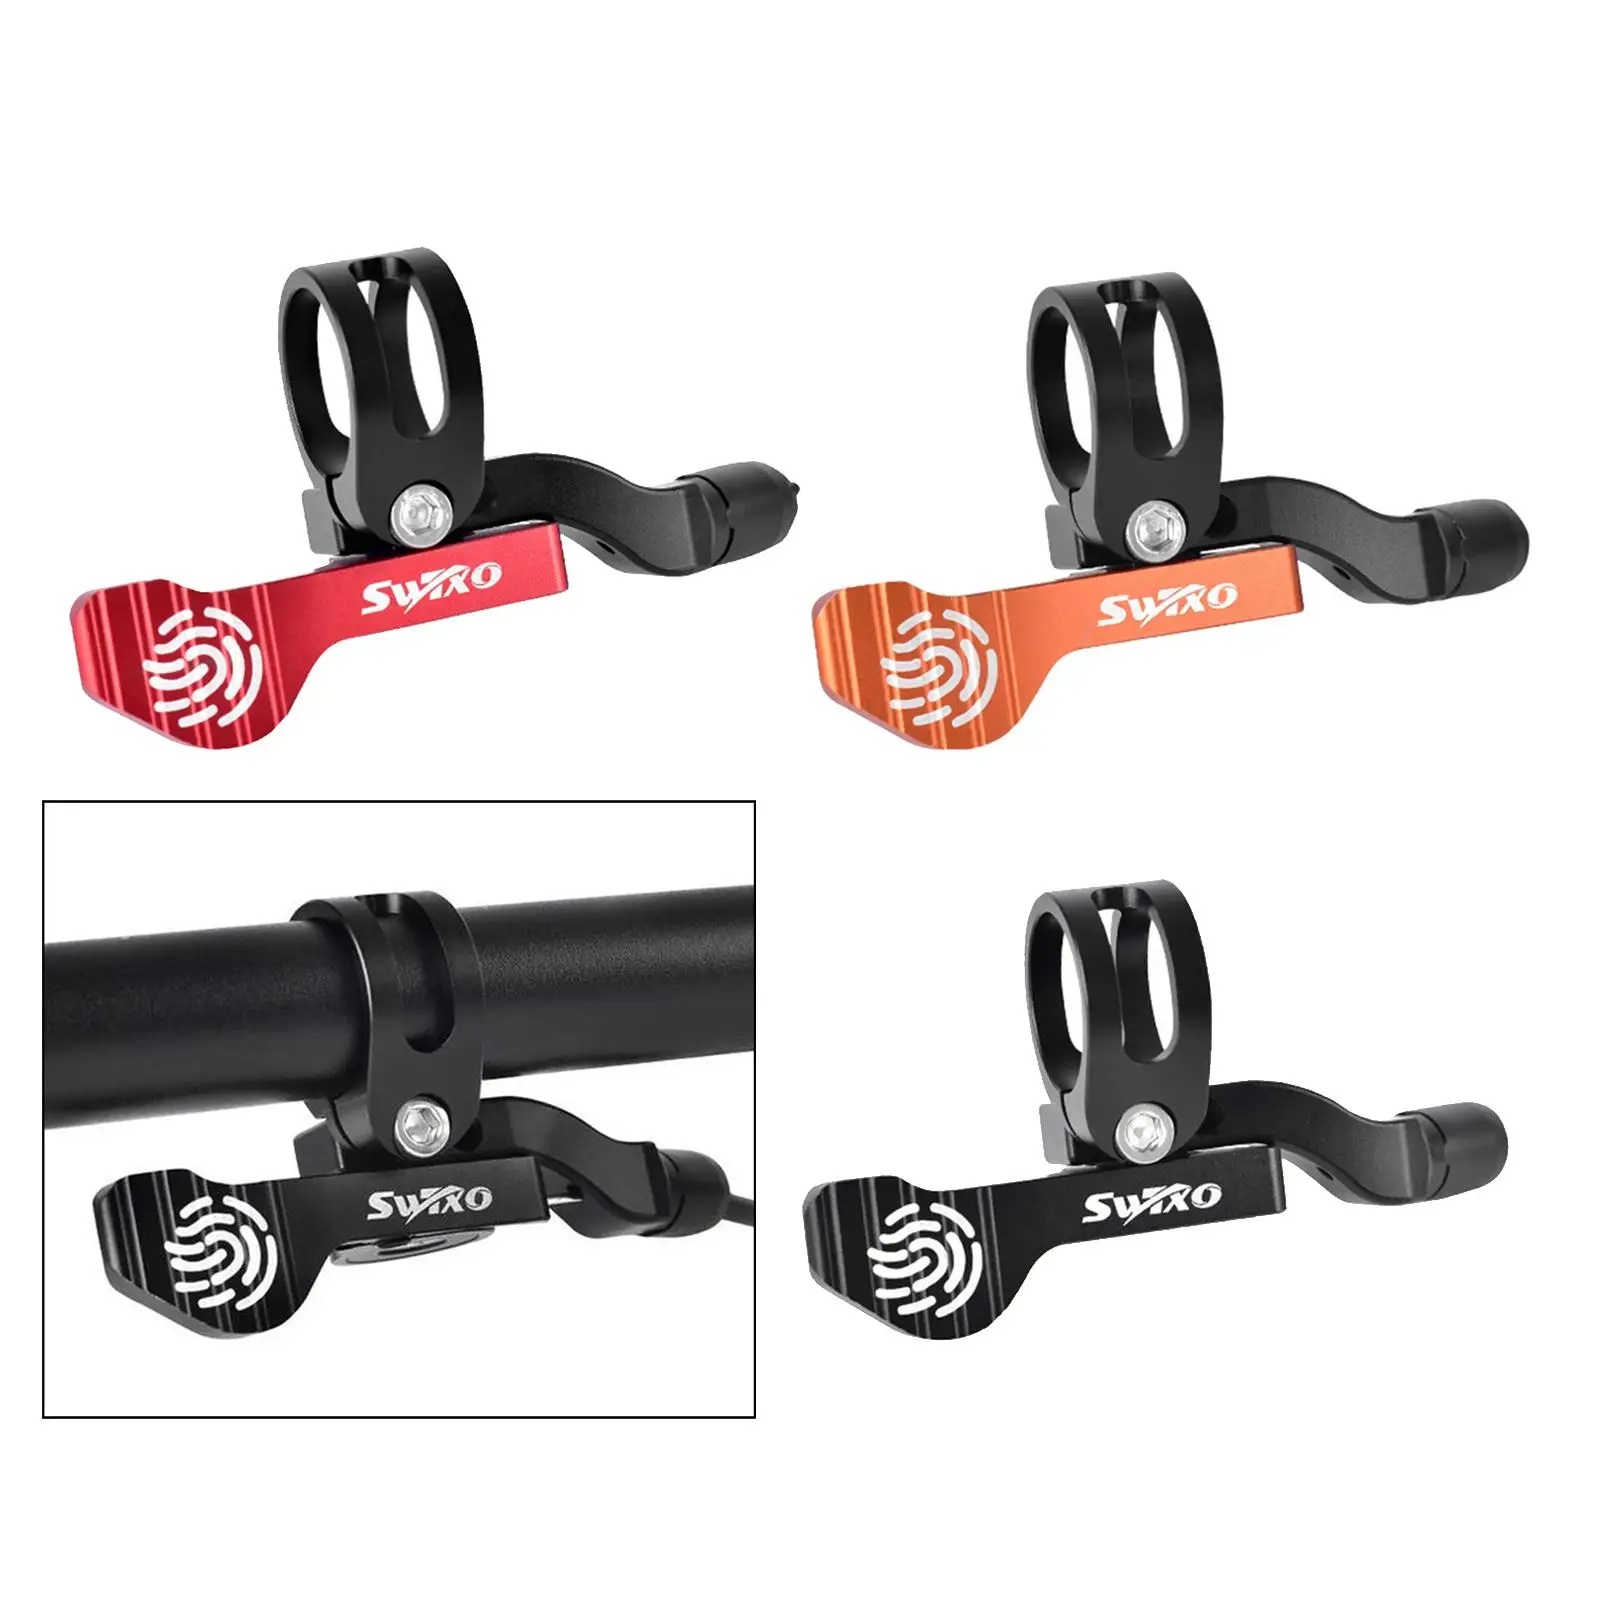 Seatpost Dropper Remote   External and Internal Routing Droppers Clamp